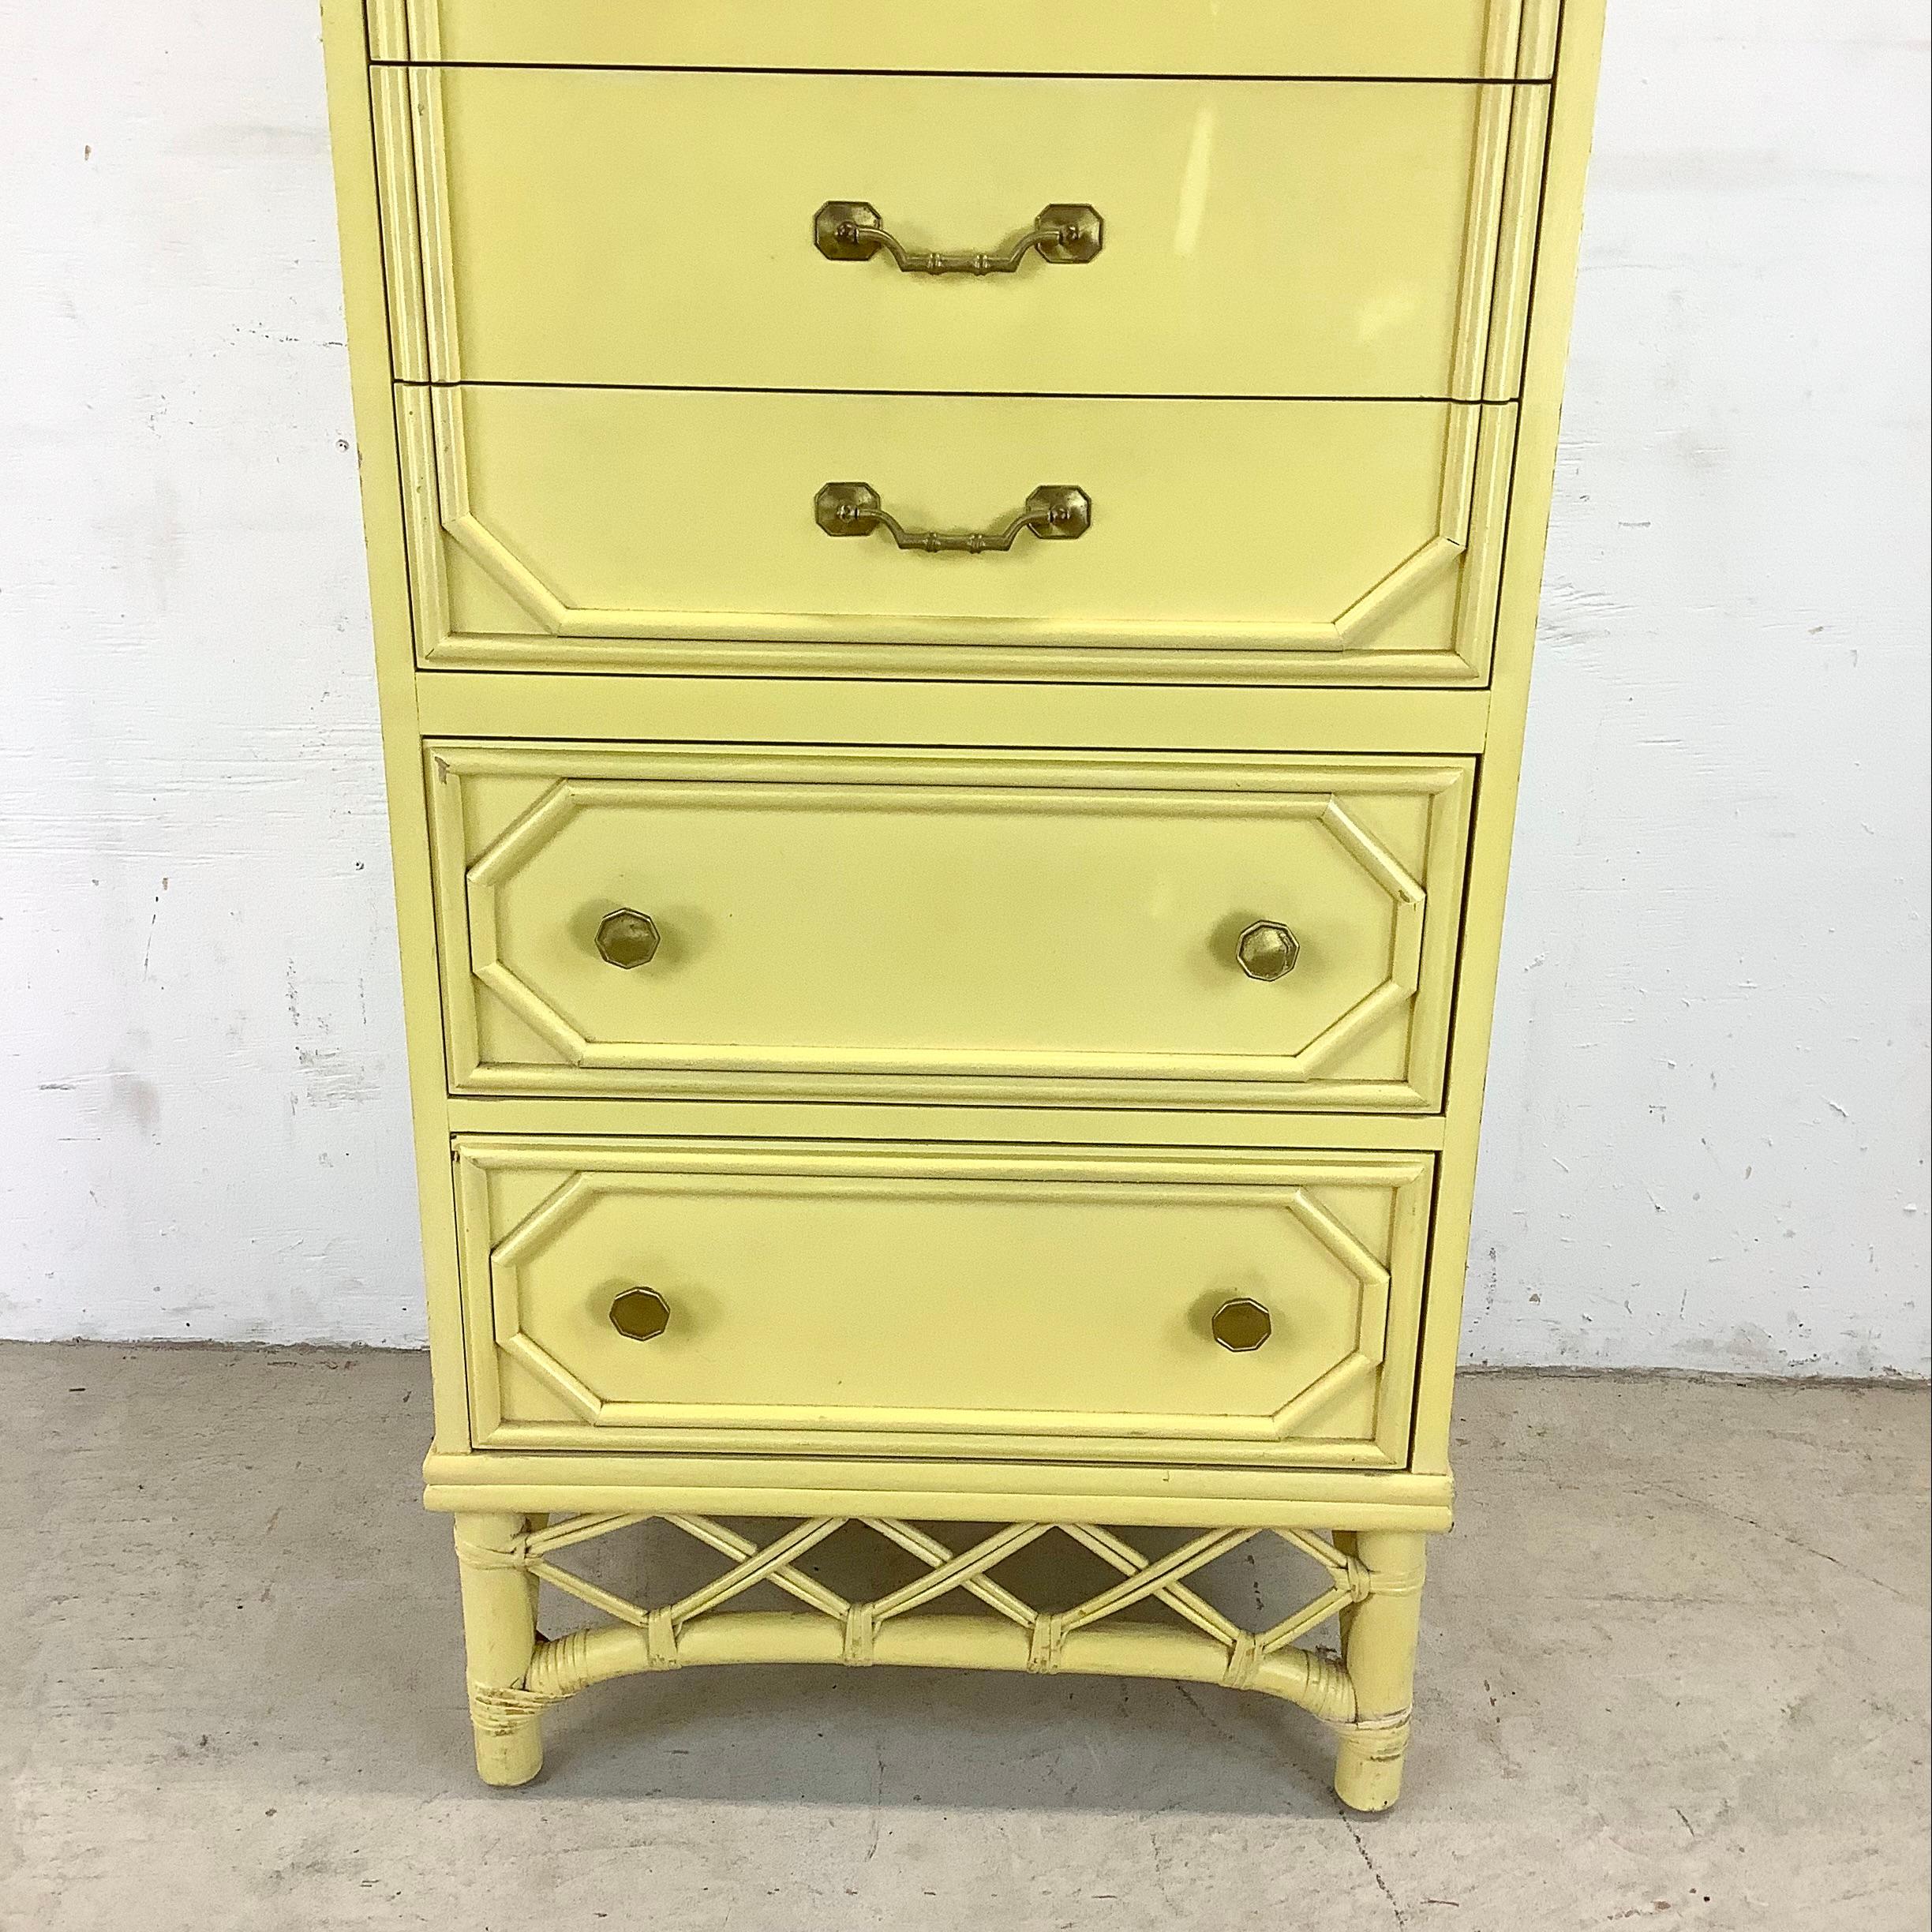 Other Vintage Tall Chest of Drawers or Lingerie Chest